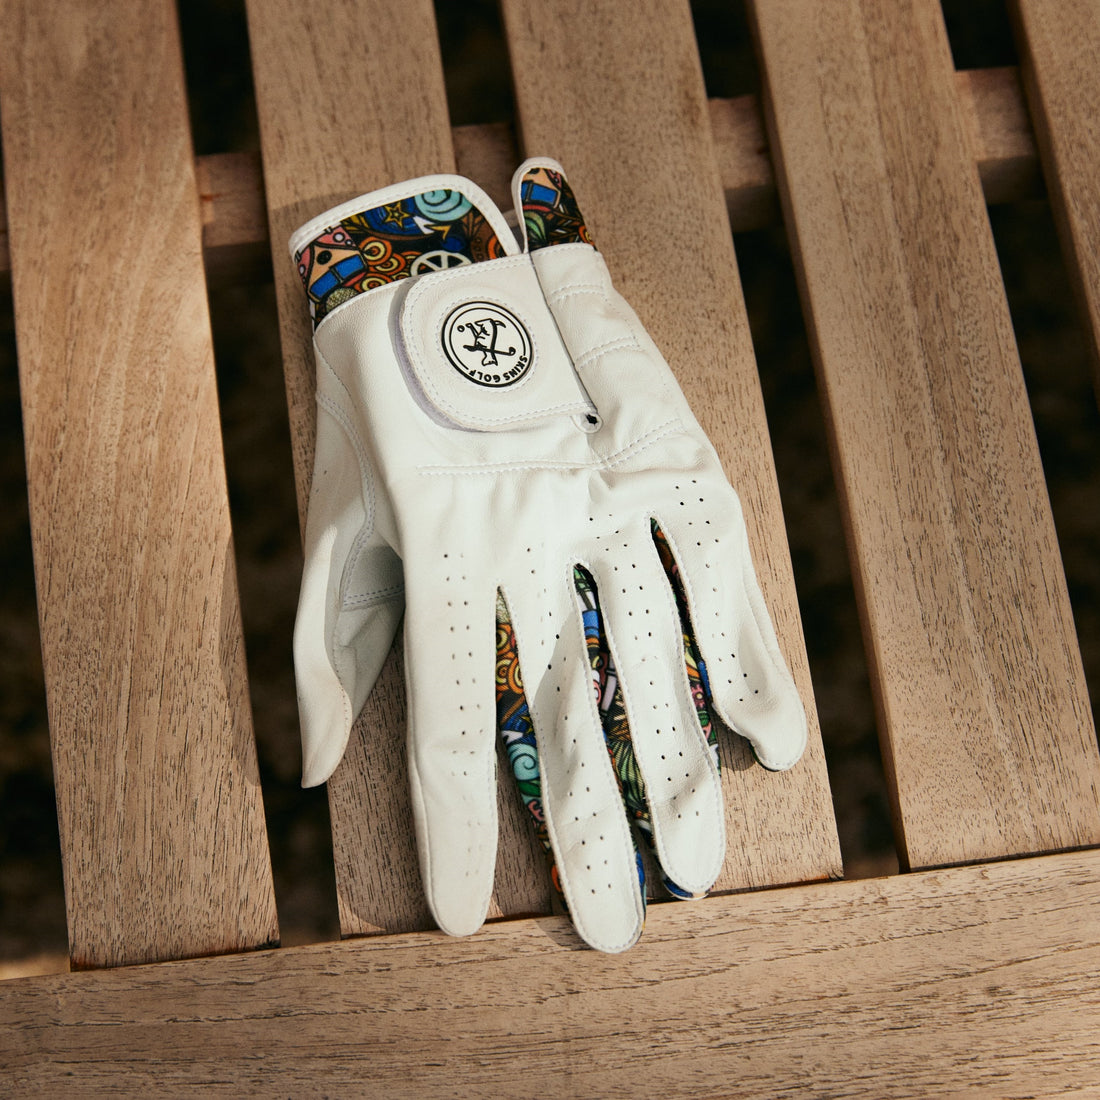 Cool golf glove on a wooden bench